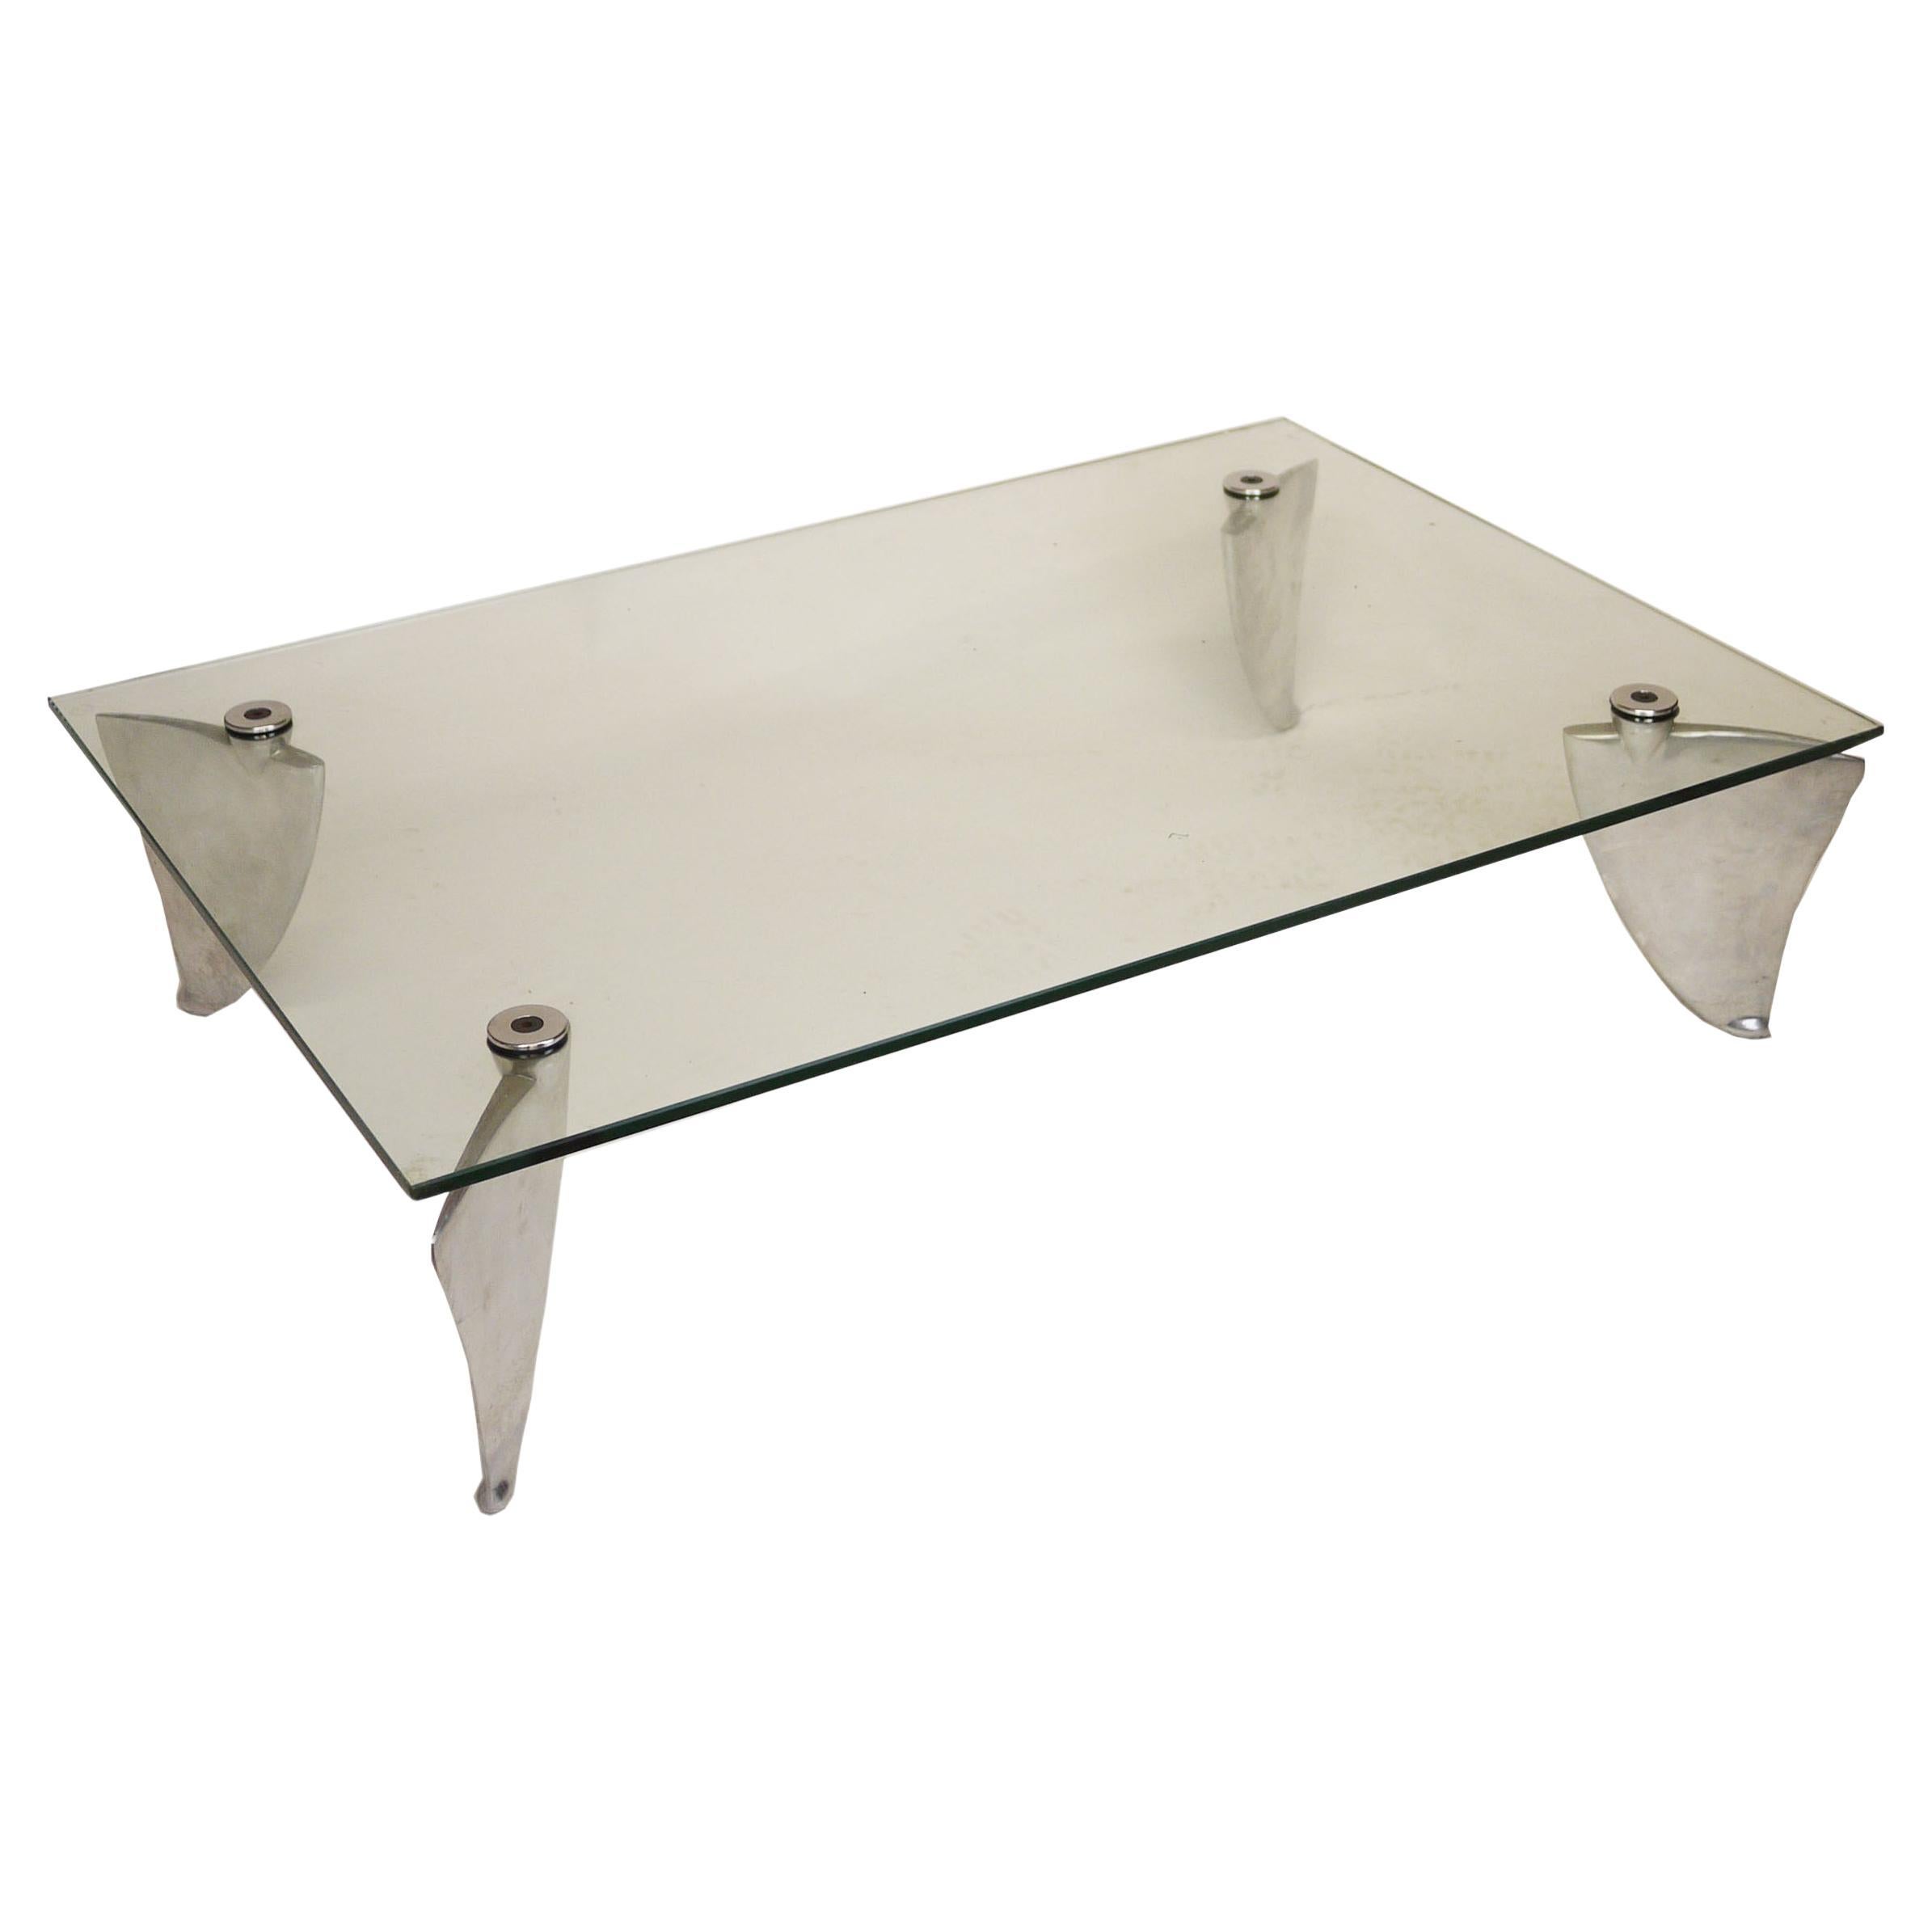 Vintage Glass and Aluminum 'Fipper' Coffee Table by Matthew Hilton for SCP, 1980 For Sale